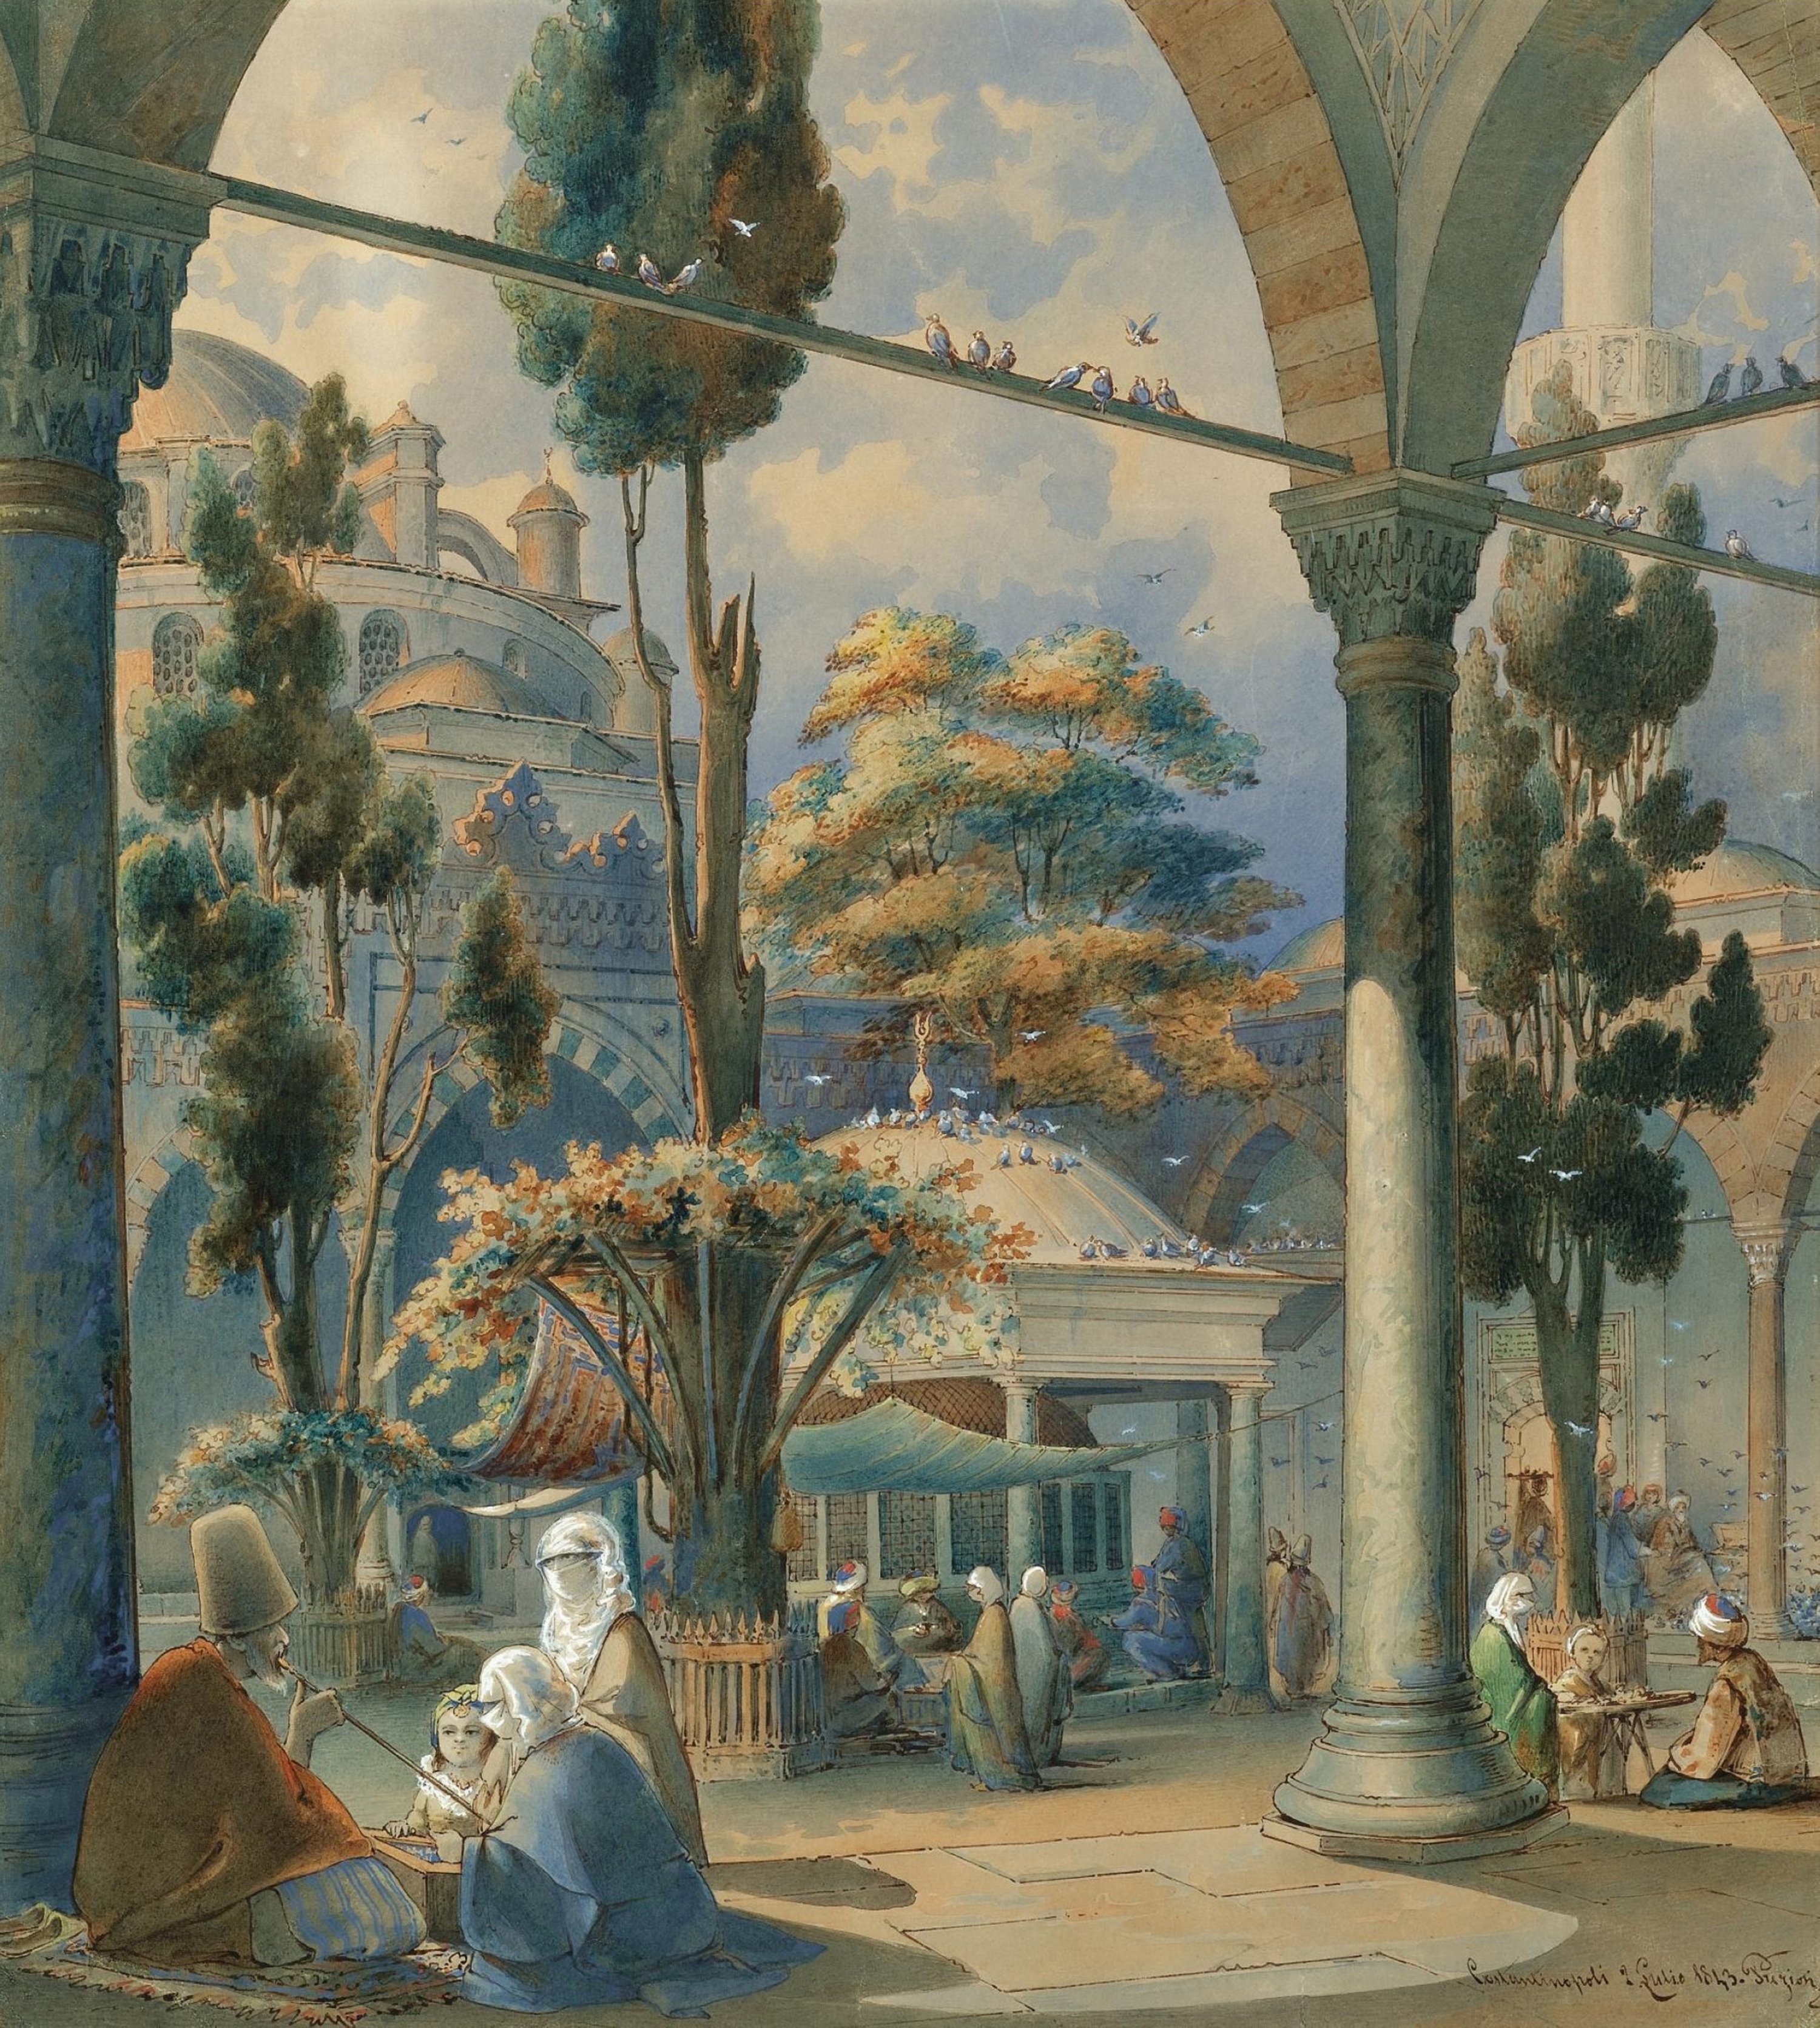 A painting by Amedeo Preziosi depicts the courtyard of the Bayezid Mosque in Istanbul. (Getty Images)